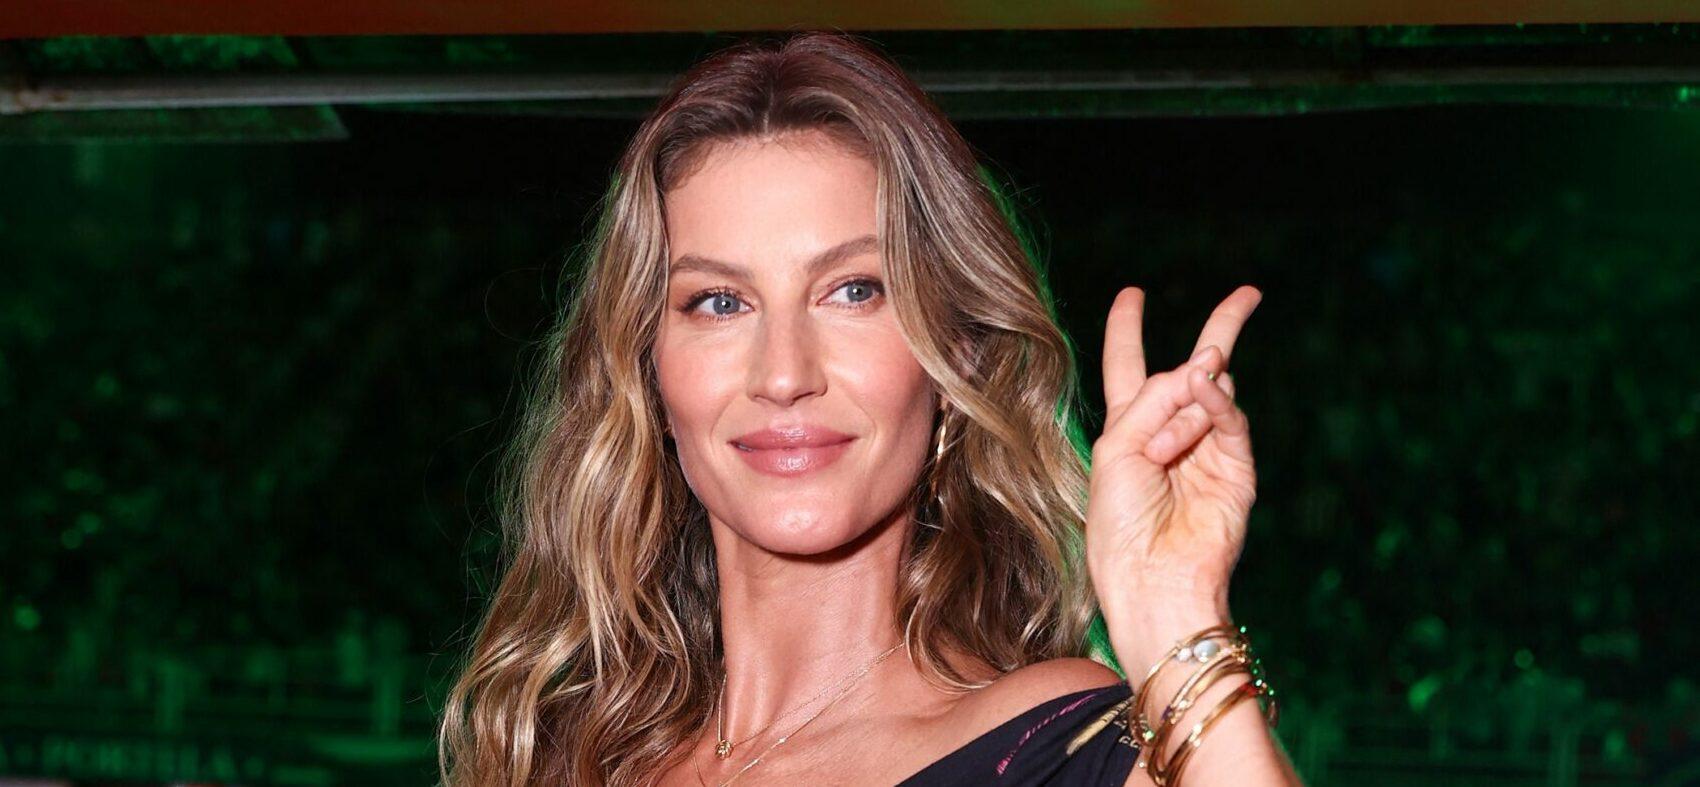 Fans Slam Gisele Bündchen For Posting ‘Thirst Trap’ While The Amazon Burns